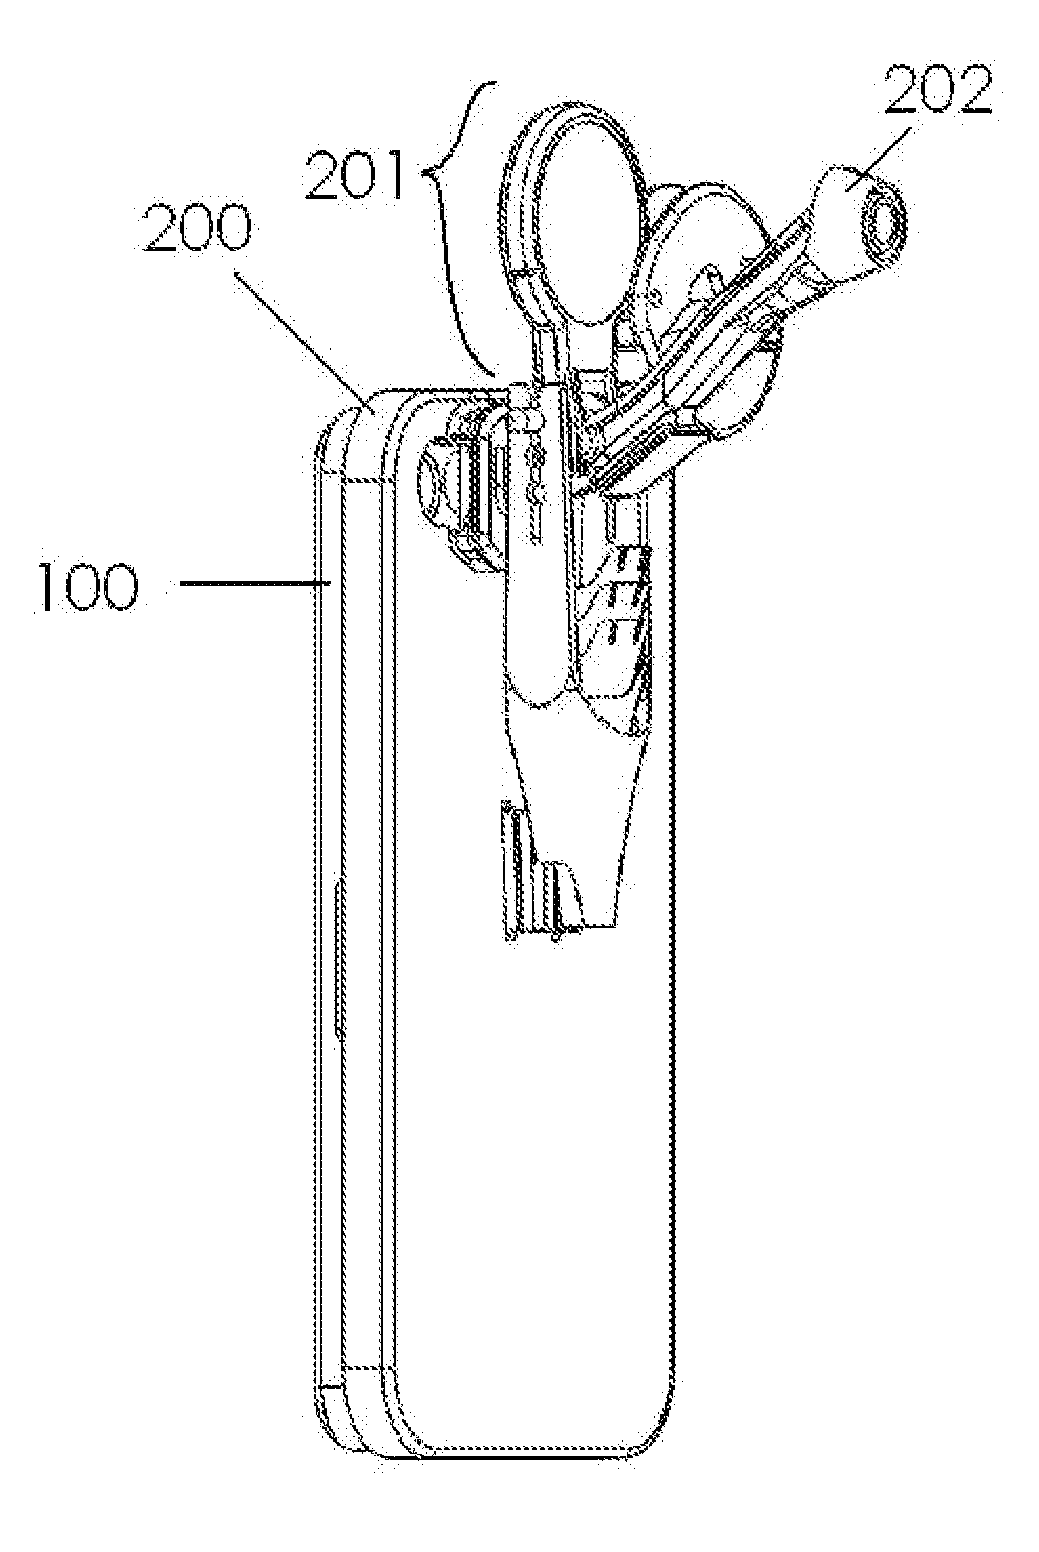 Otoscope attachment to be used in conjunction with a smart phone and a method for its use